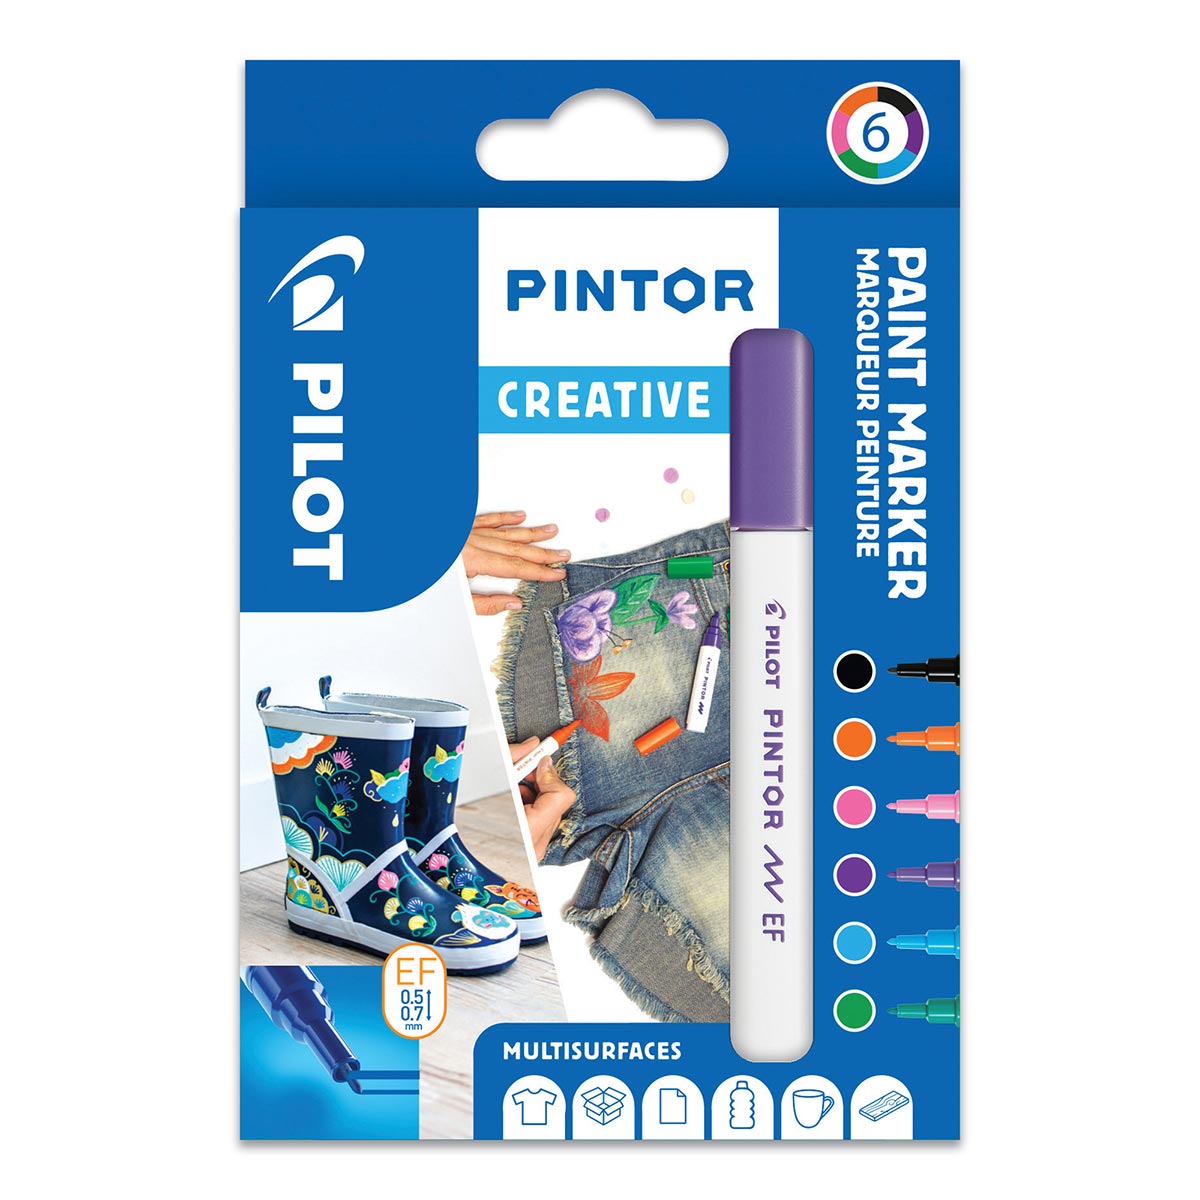 Pintor - Paint Extra Fine Suggerico 6 Pacchetto - Creative